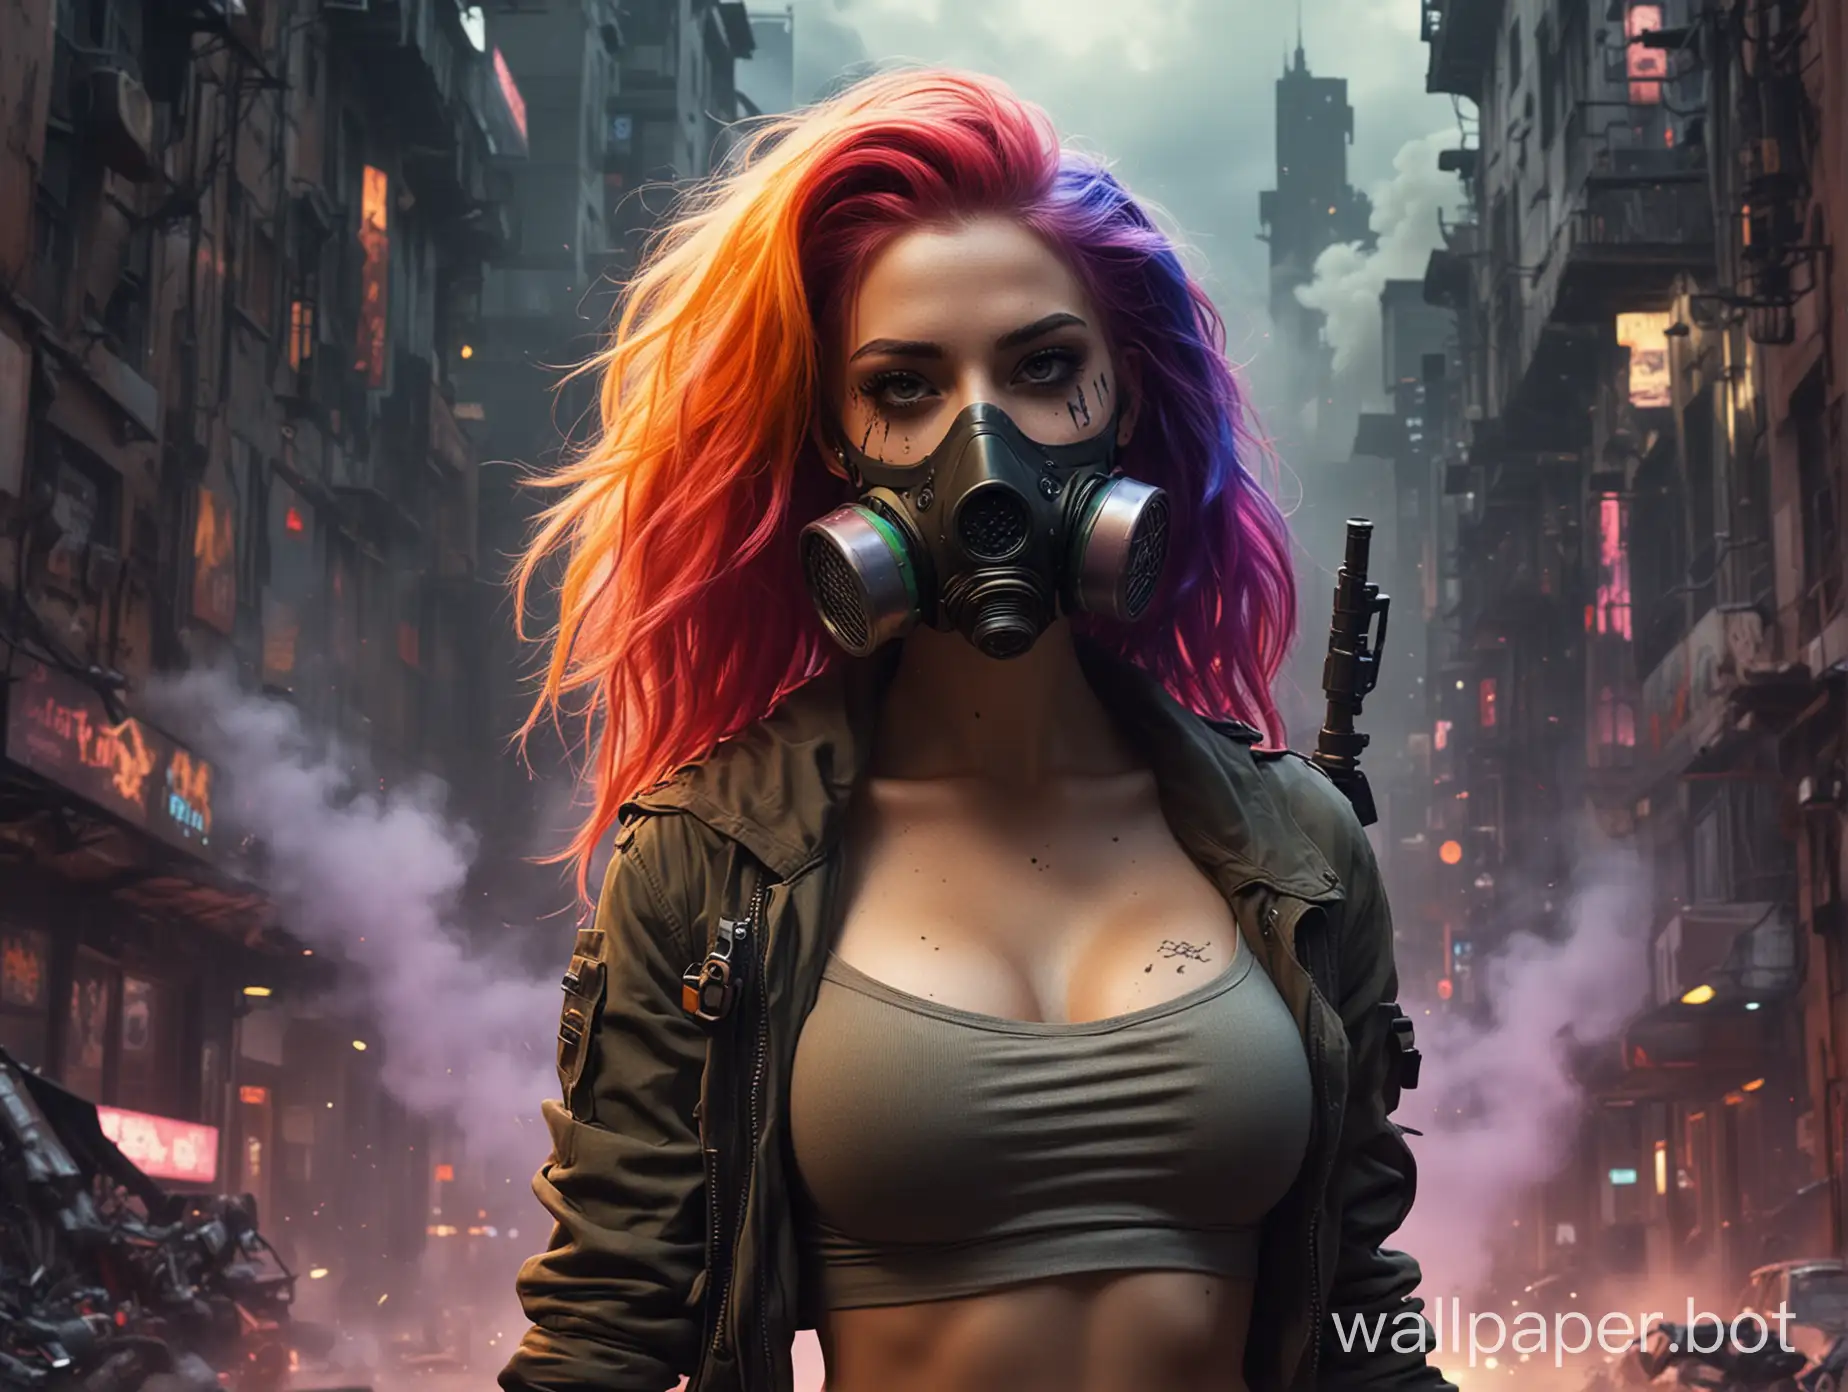 voluptuous, curvy young woman, bodacious, striking pose, long, vibrant, wavy, rainbow hair, fantastical, glowing gas mask, AK-47, dramatic smoke cloud, dark, gritty, post-apocalyptic background, Ash Thorp, Syd Mead inspired, bold, neon lights, ripped, torn camouflage clothing, sensual, sultry expression, intense gaze, cyberpunk, dystopian atmosphere